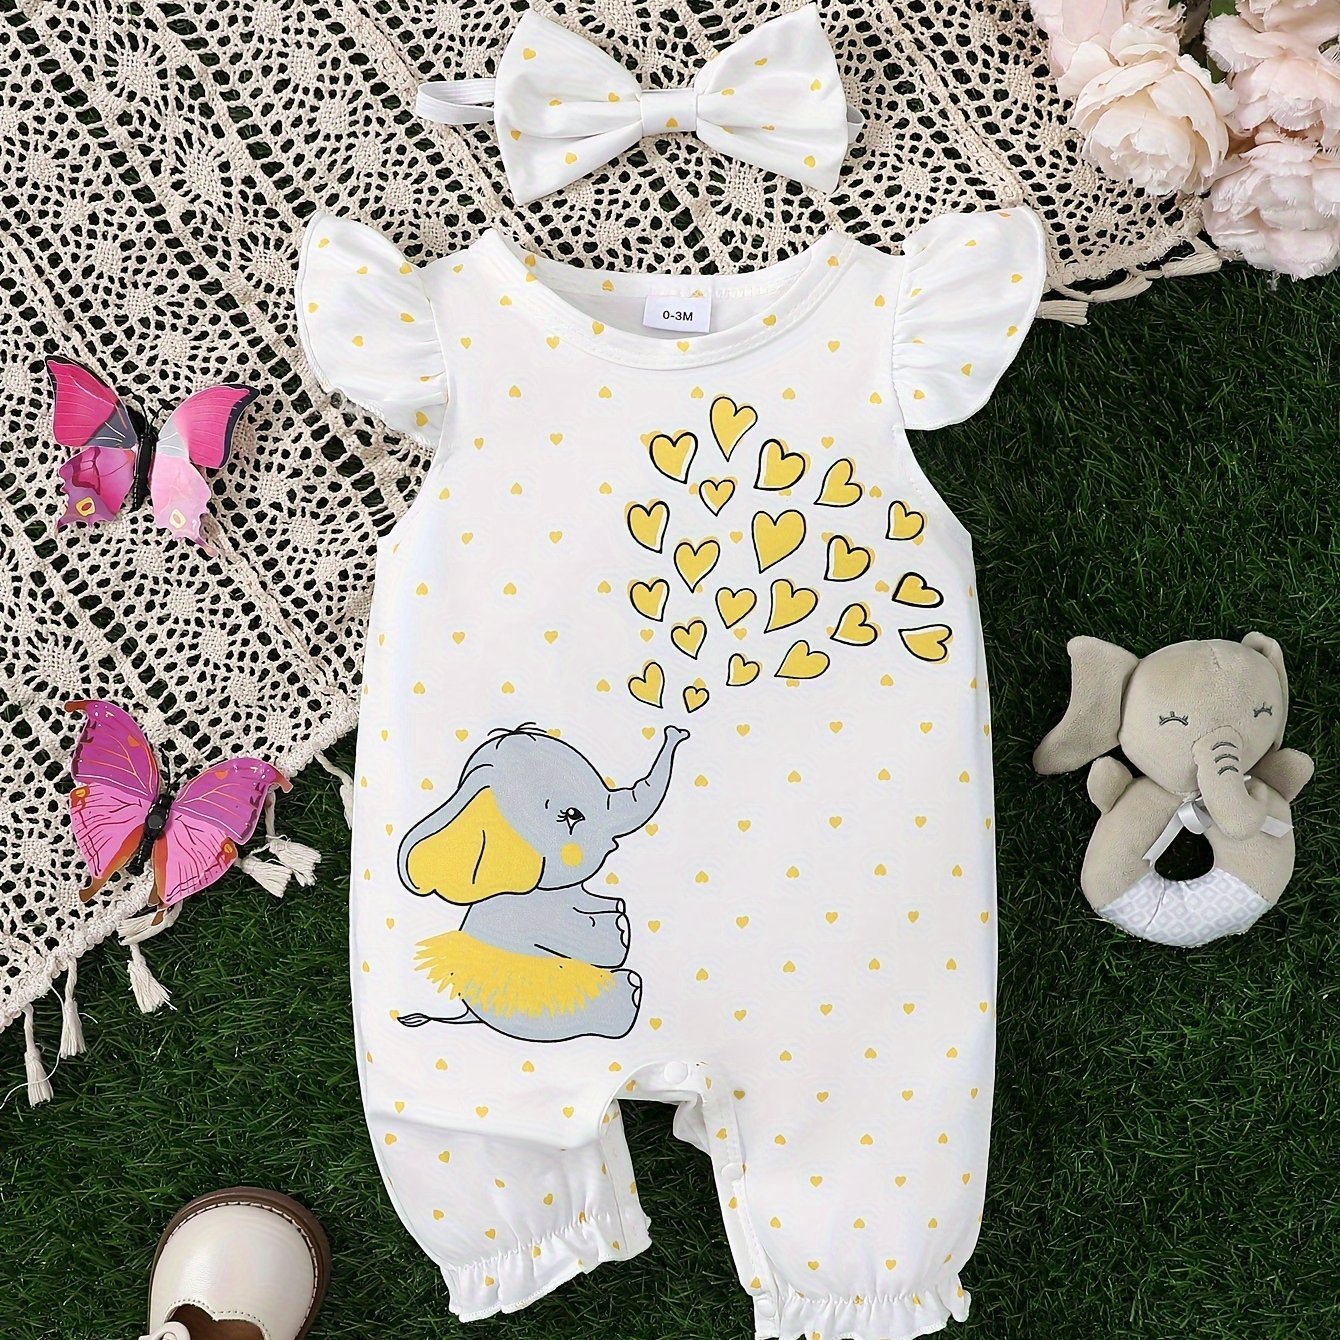 Adorable Baby Girls Elephant & Heart Print Romper Bodysuit with Matching Headband - Soft, Summer - Ready Outfit for Toddler & Infant Girls - Perfect Gift Idea - Ammpoure Wellbeing